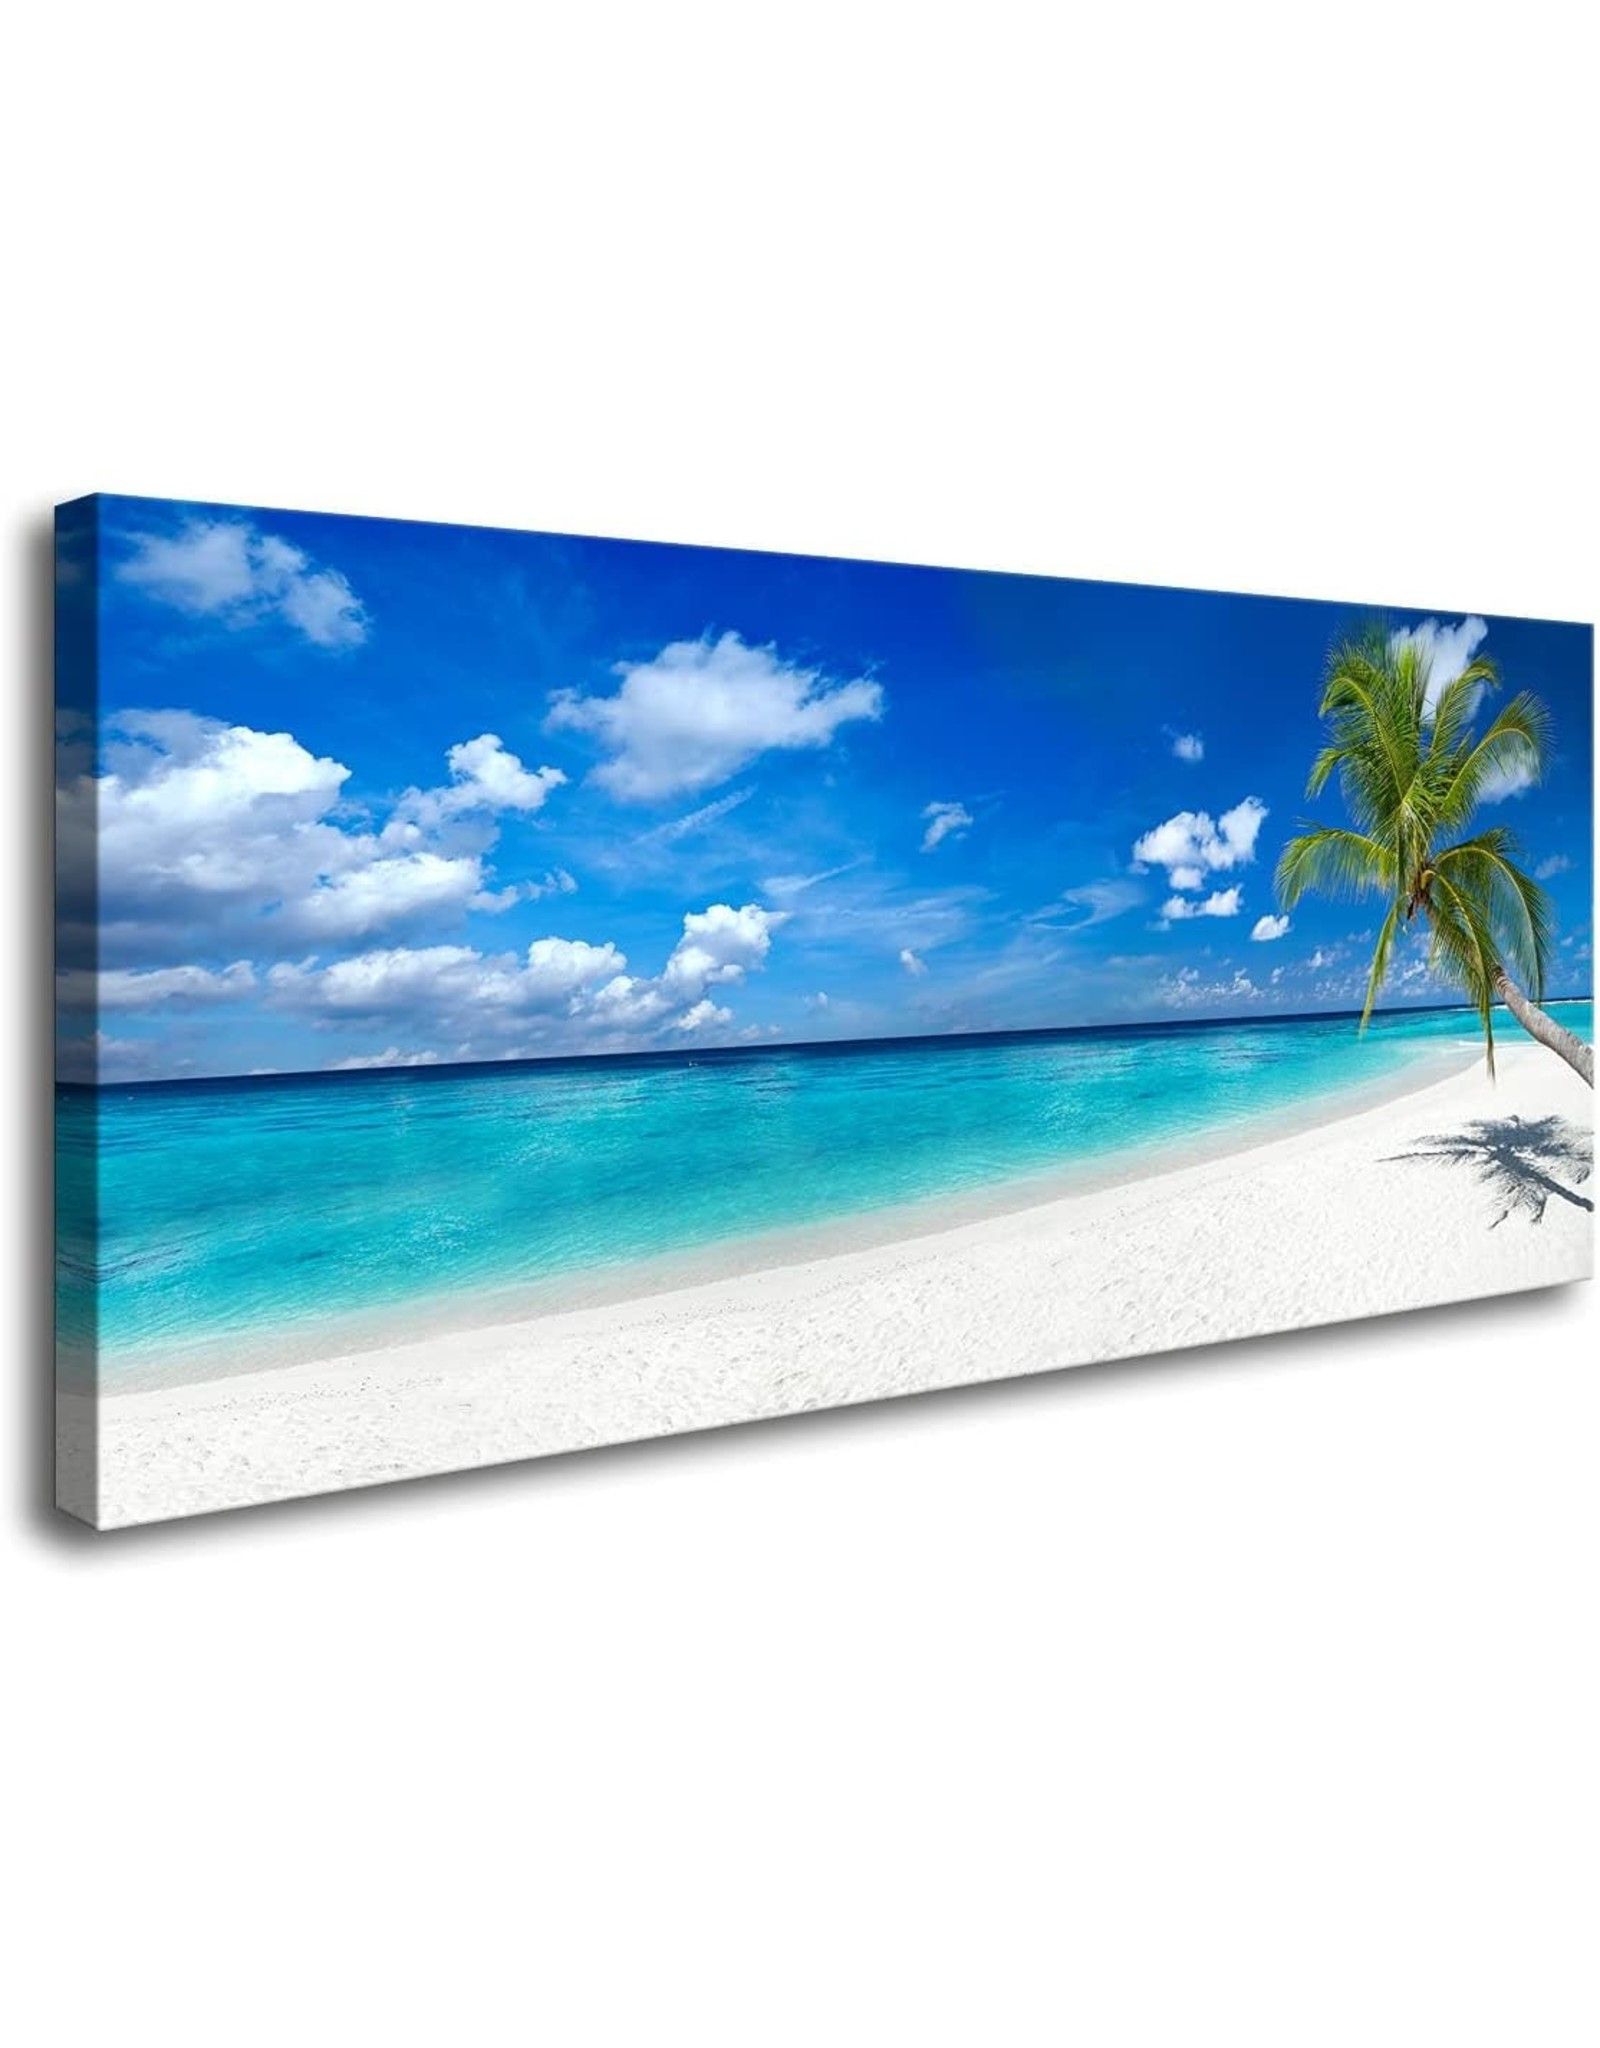 Xxmwallart Fc2475 Seascape Wall Art Tropical Paradise Beach With White Sand  And Coco Palms Canvas Wall Art Summer Beach Painting Sea Nature Pictures  For Living Room Bedroom Home And Office Wall Decor – Regarding Tropical Paradise Wall Art (View 15 of 15)